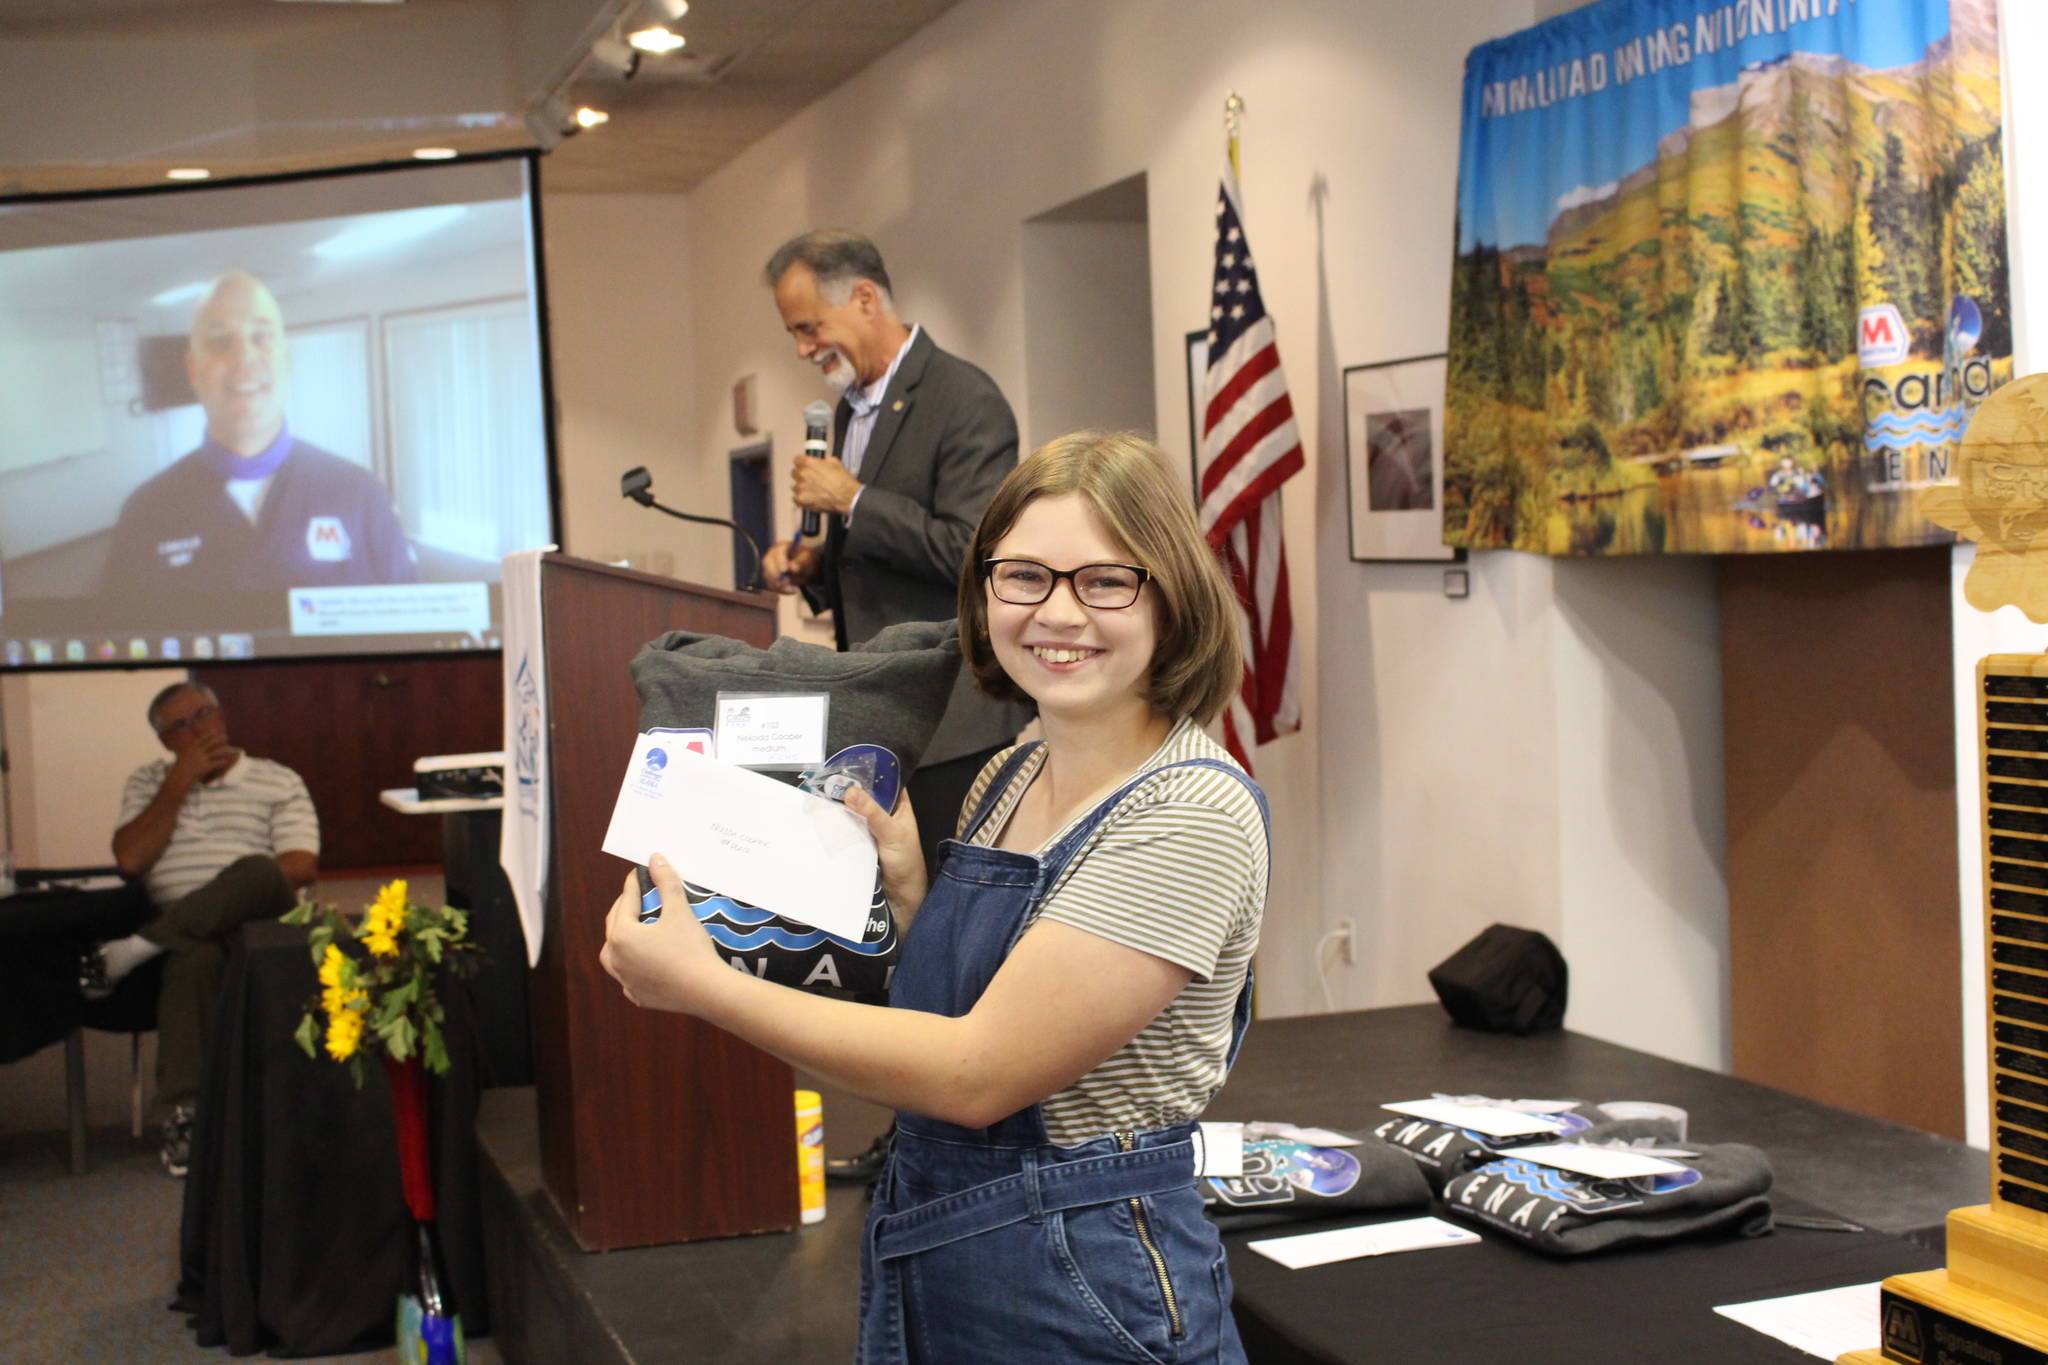 Nekoda Cooper smiles with her award for being a Caring for the Kenai Finalist during the Caring for the Kenai Awards Ceremony at the Kenai Visitor Center on Aug. 19, 2020. (Photo by Brian Mazurek/Peninsula Clarion)